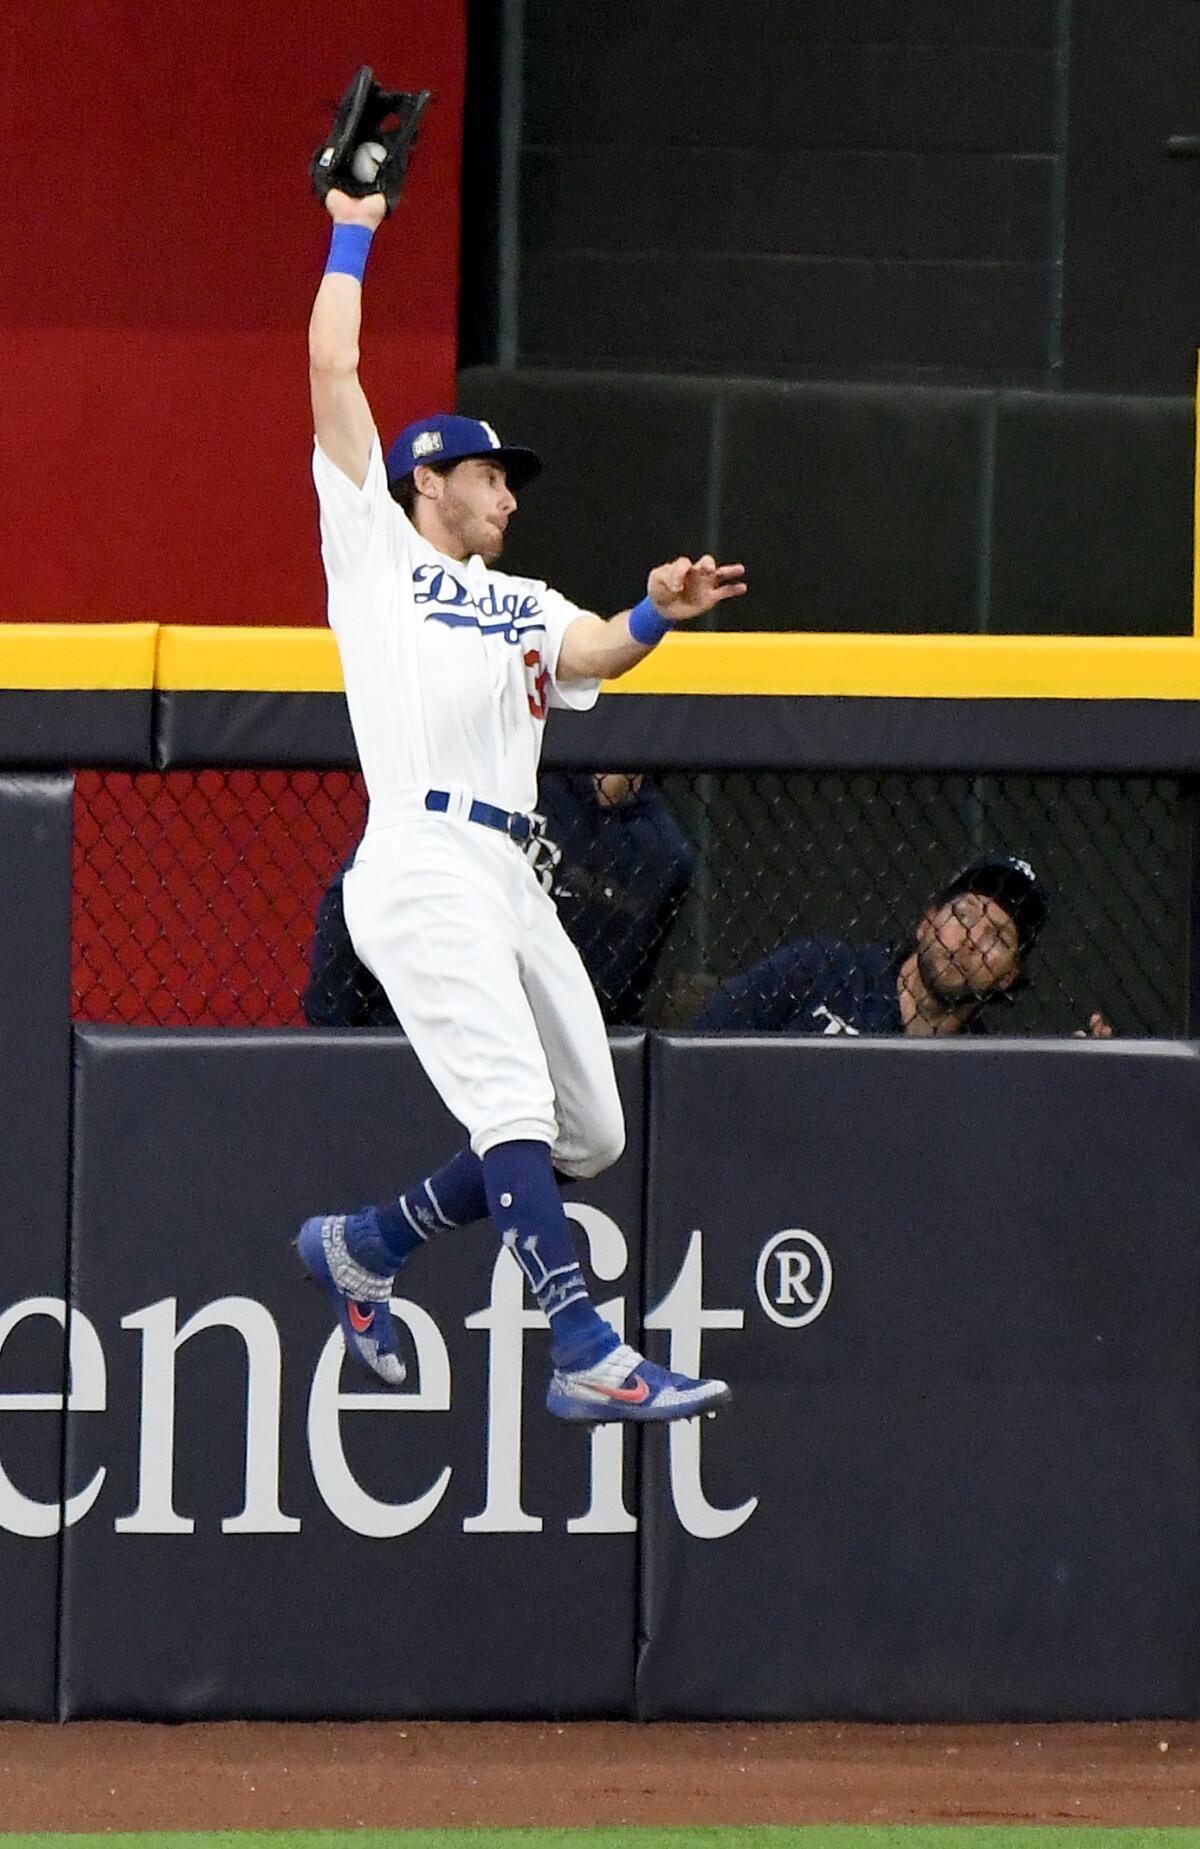 Dodgers center fielder Cody Bellinger makes a catch at the wall in front of the Rays bullpen in the 9th inning.